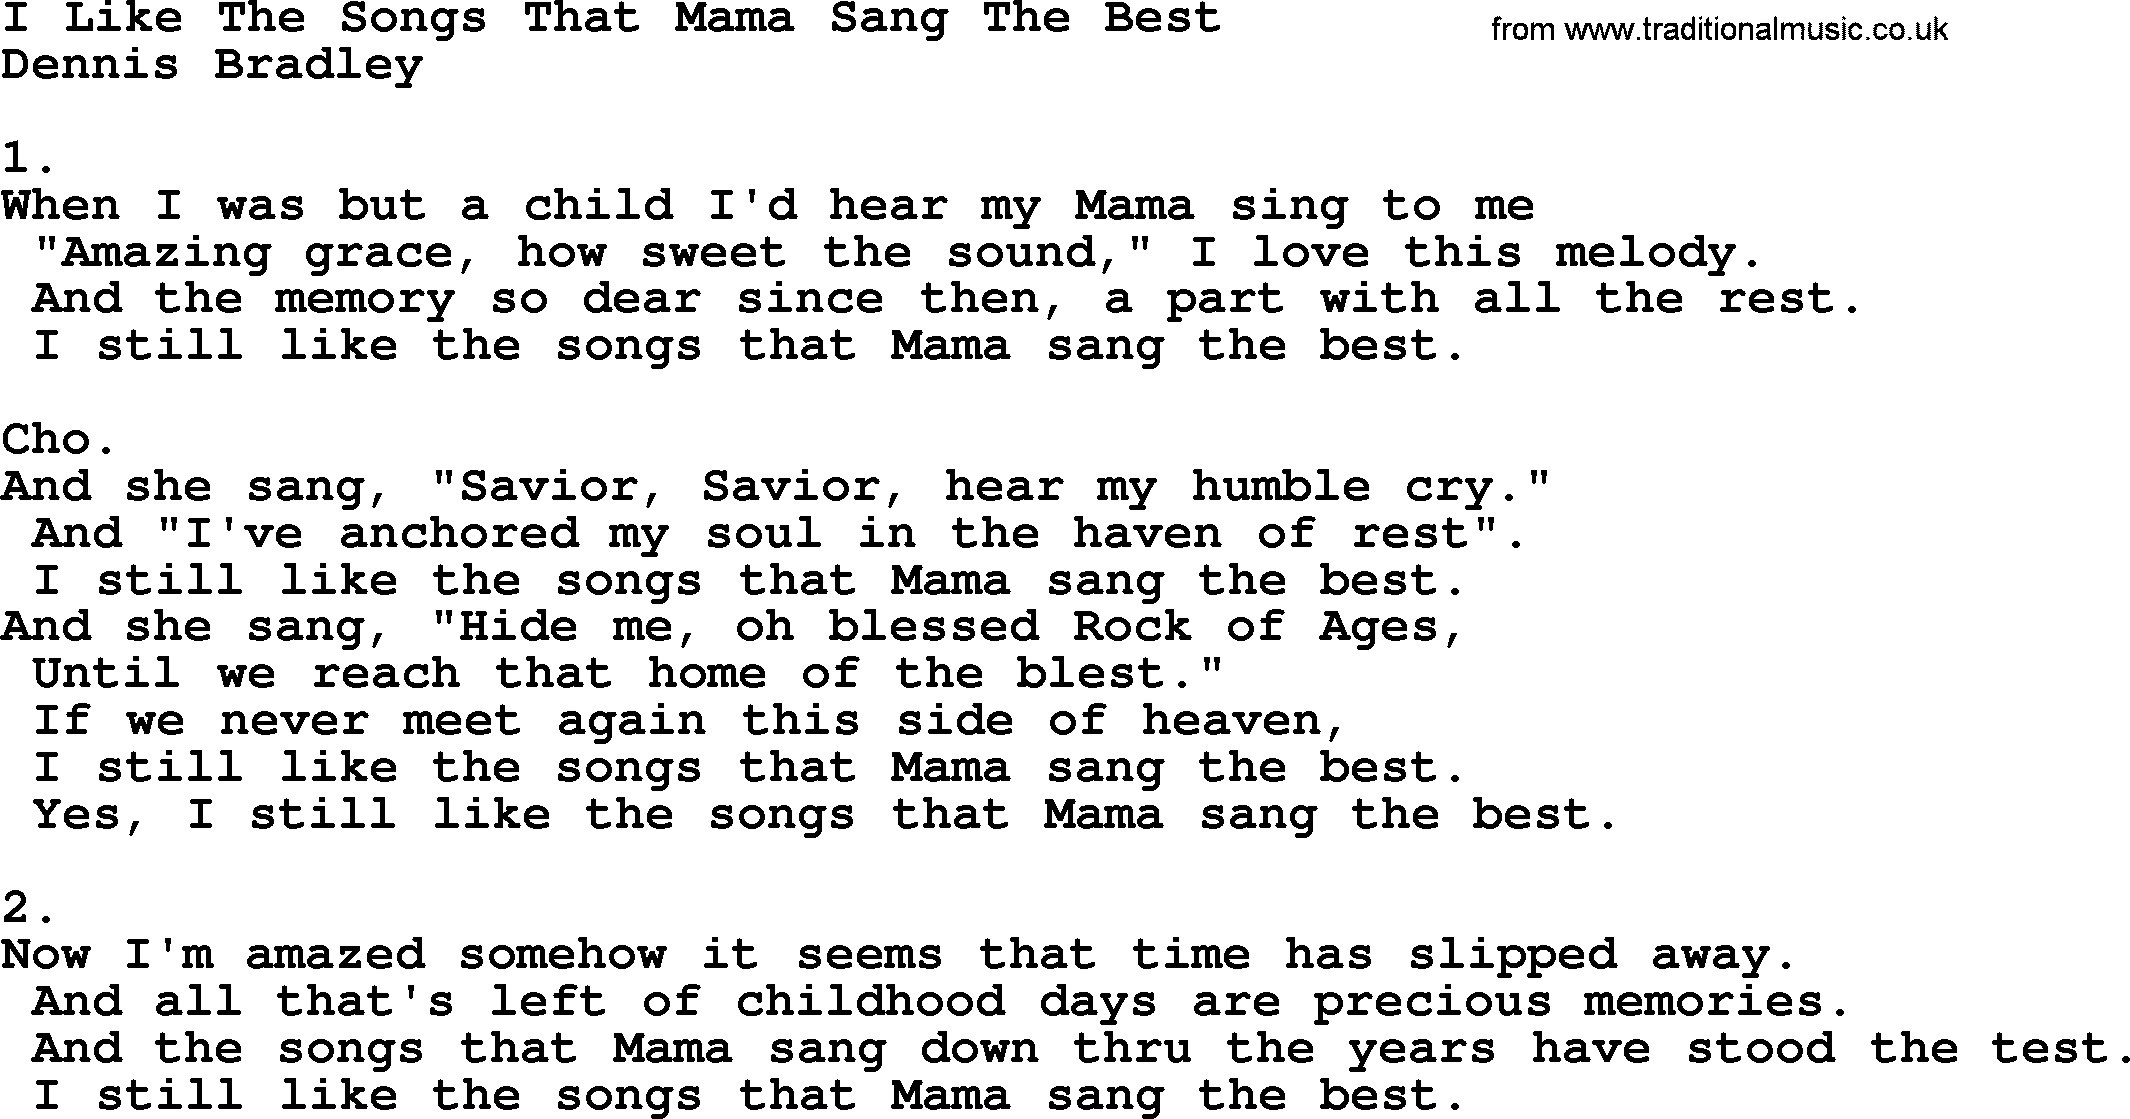 Apostolic & Pentecostal Hymns and Songs, Hymn: I Like The Songs That Mama Sang The Best lyrics and PDF